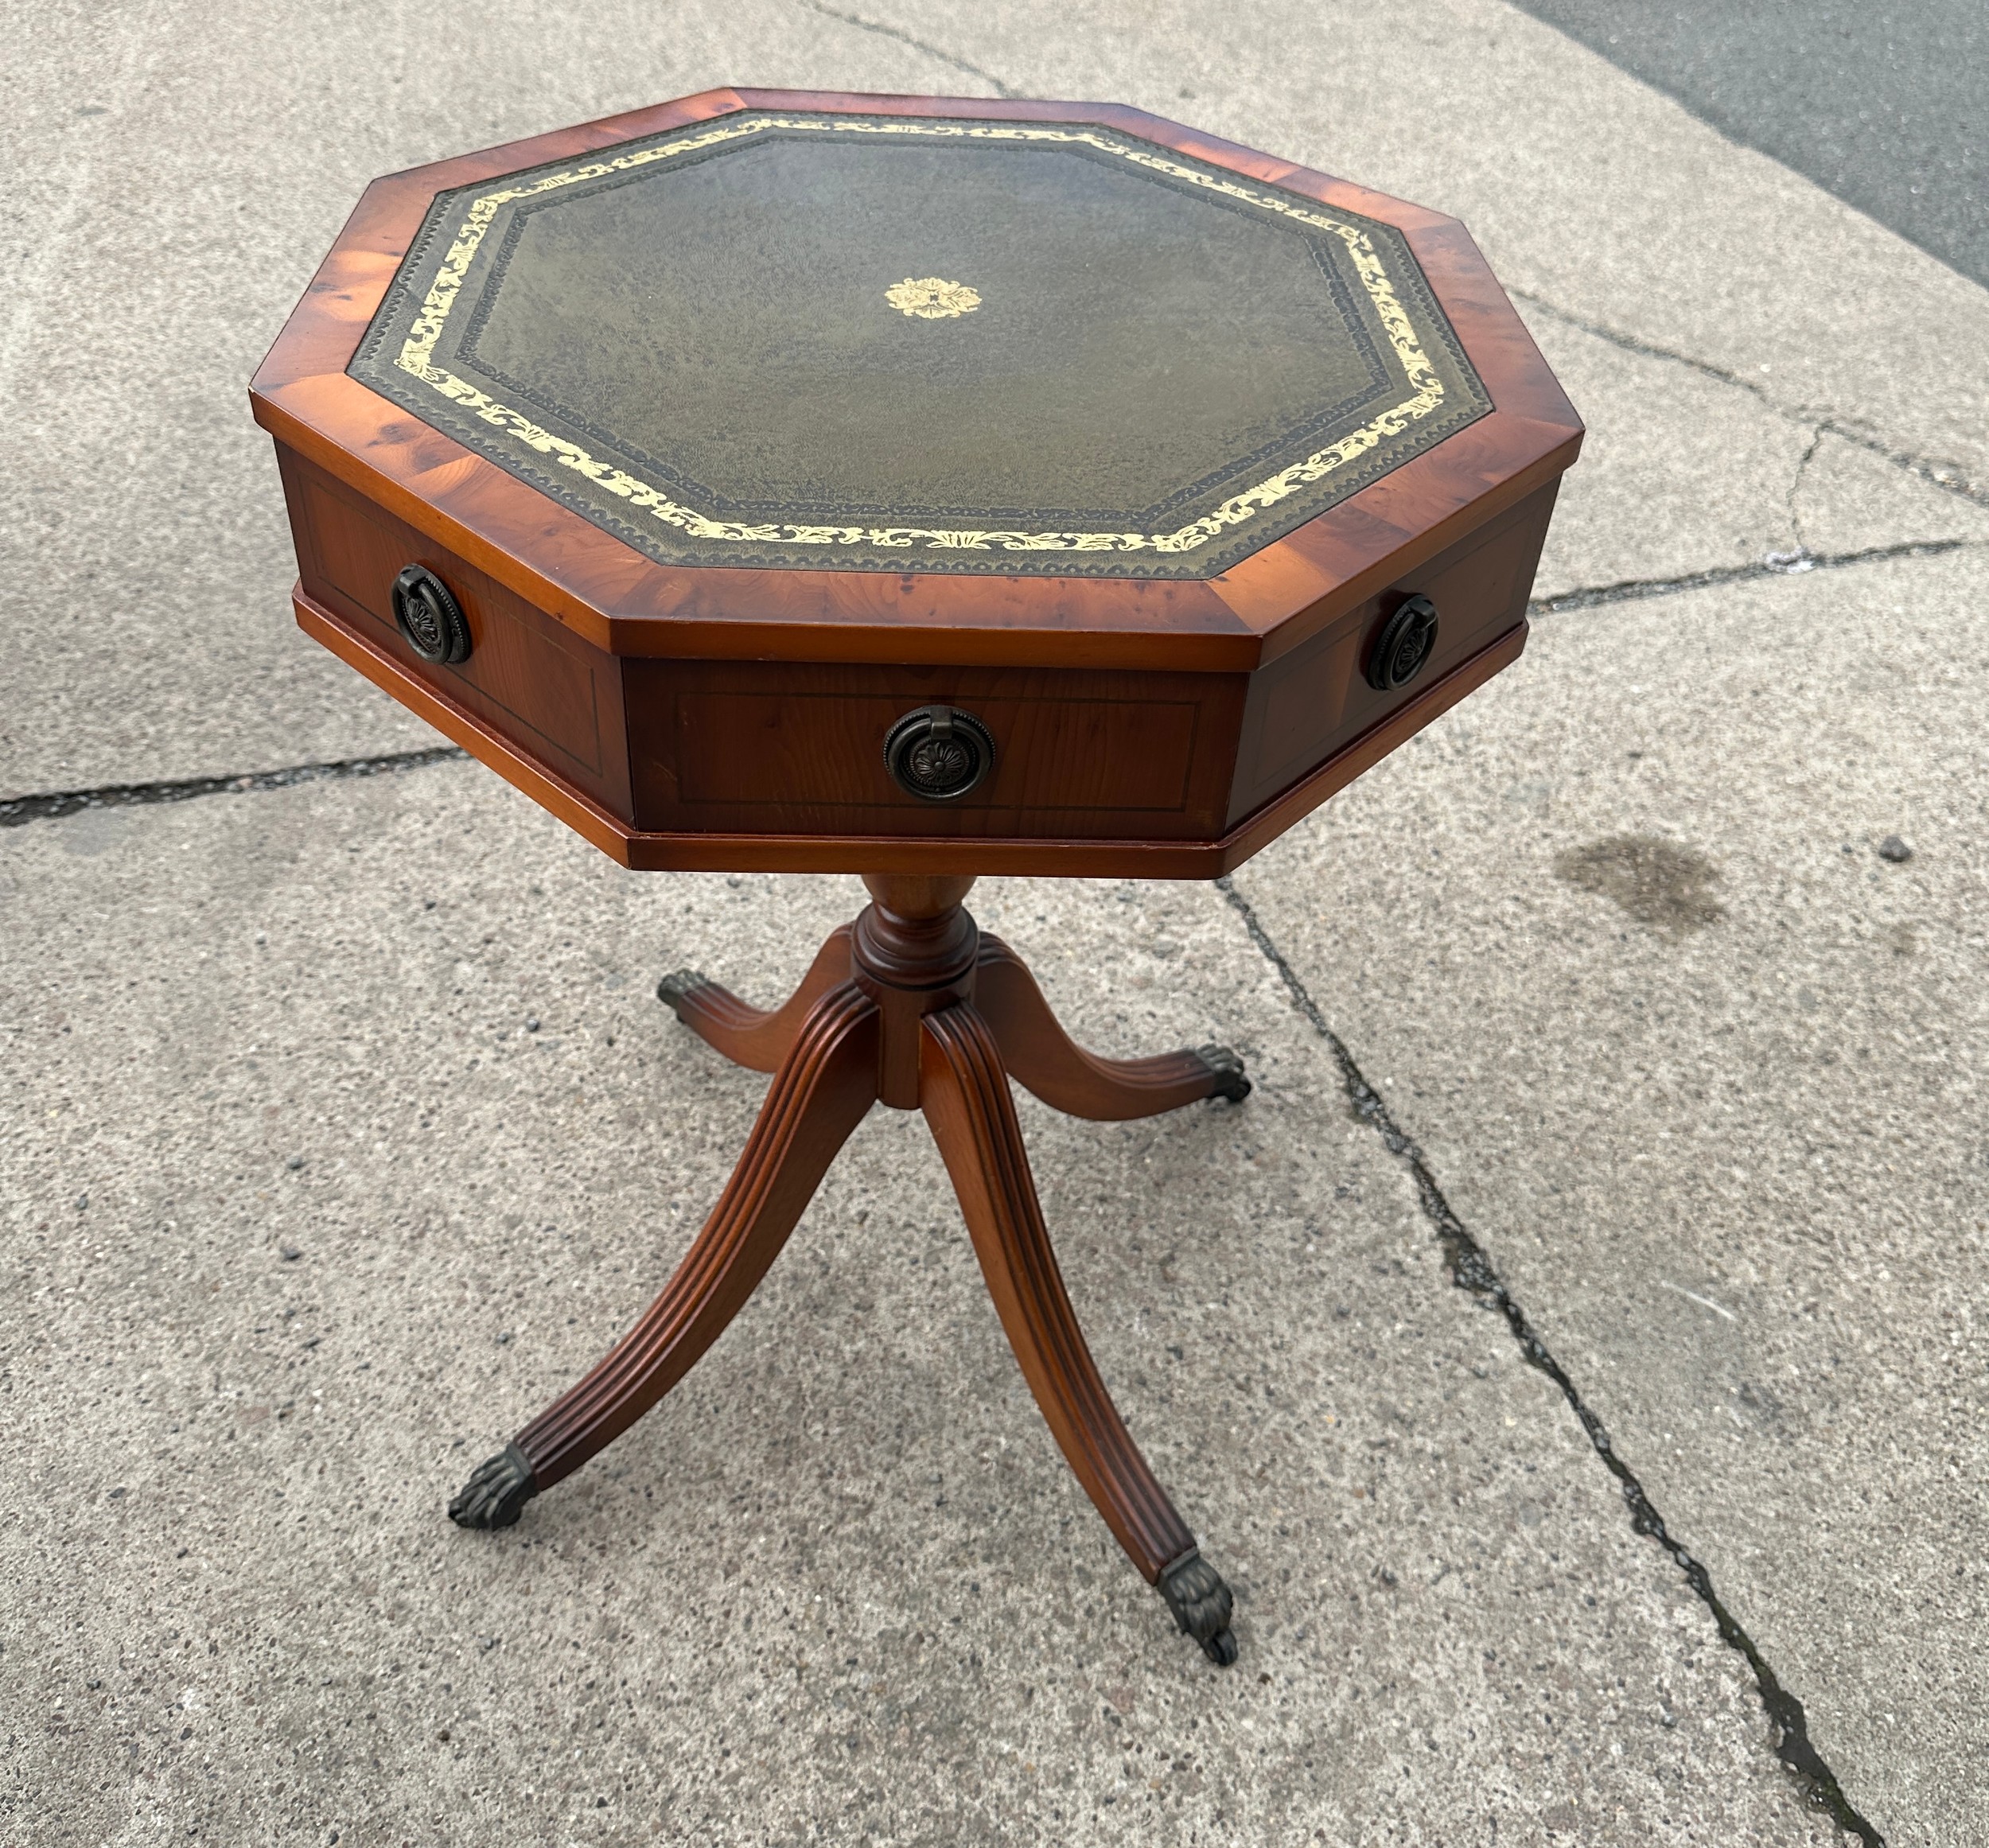 Reproduction leather topped drum table measures approx 26 inches tall - Image 3 of 3